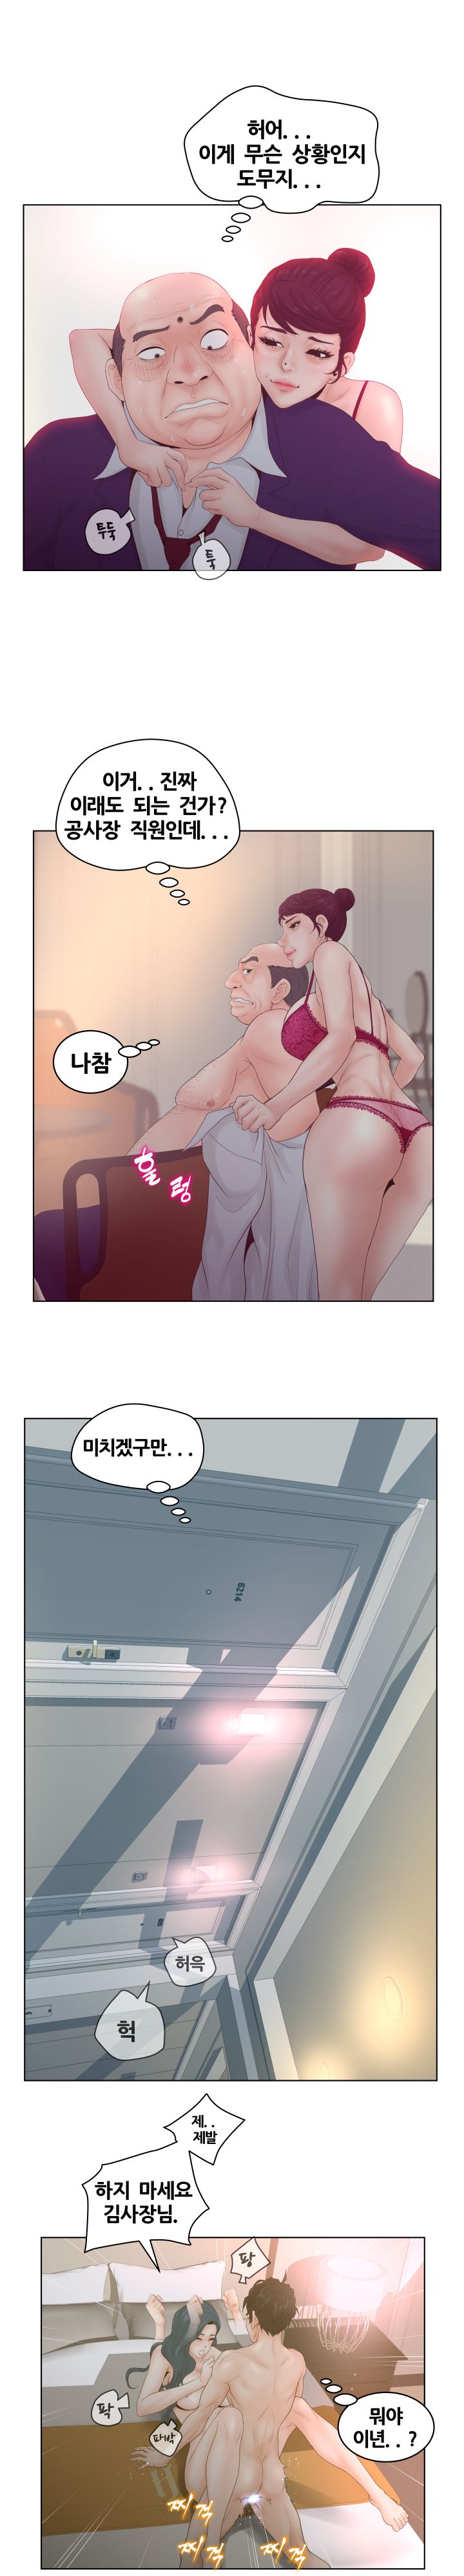 Share Girls Raw - Chapter 2 Page 9